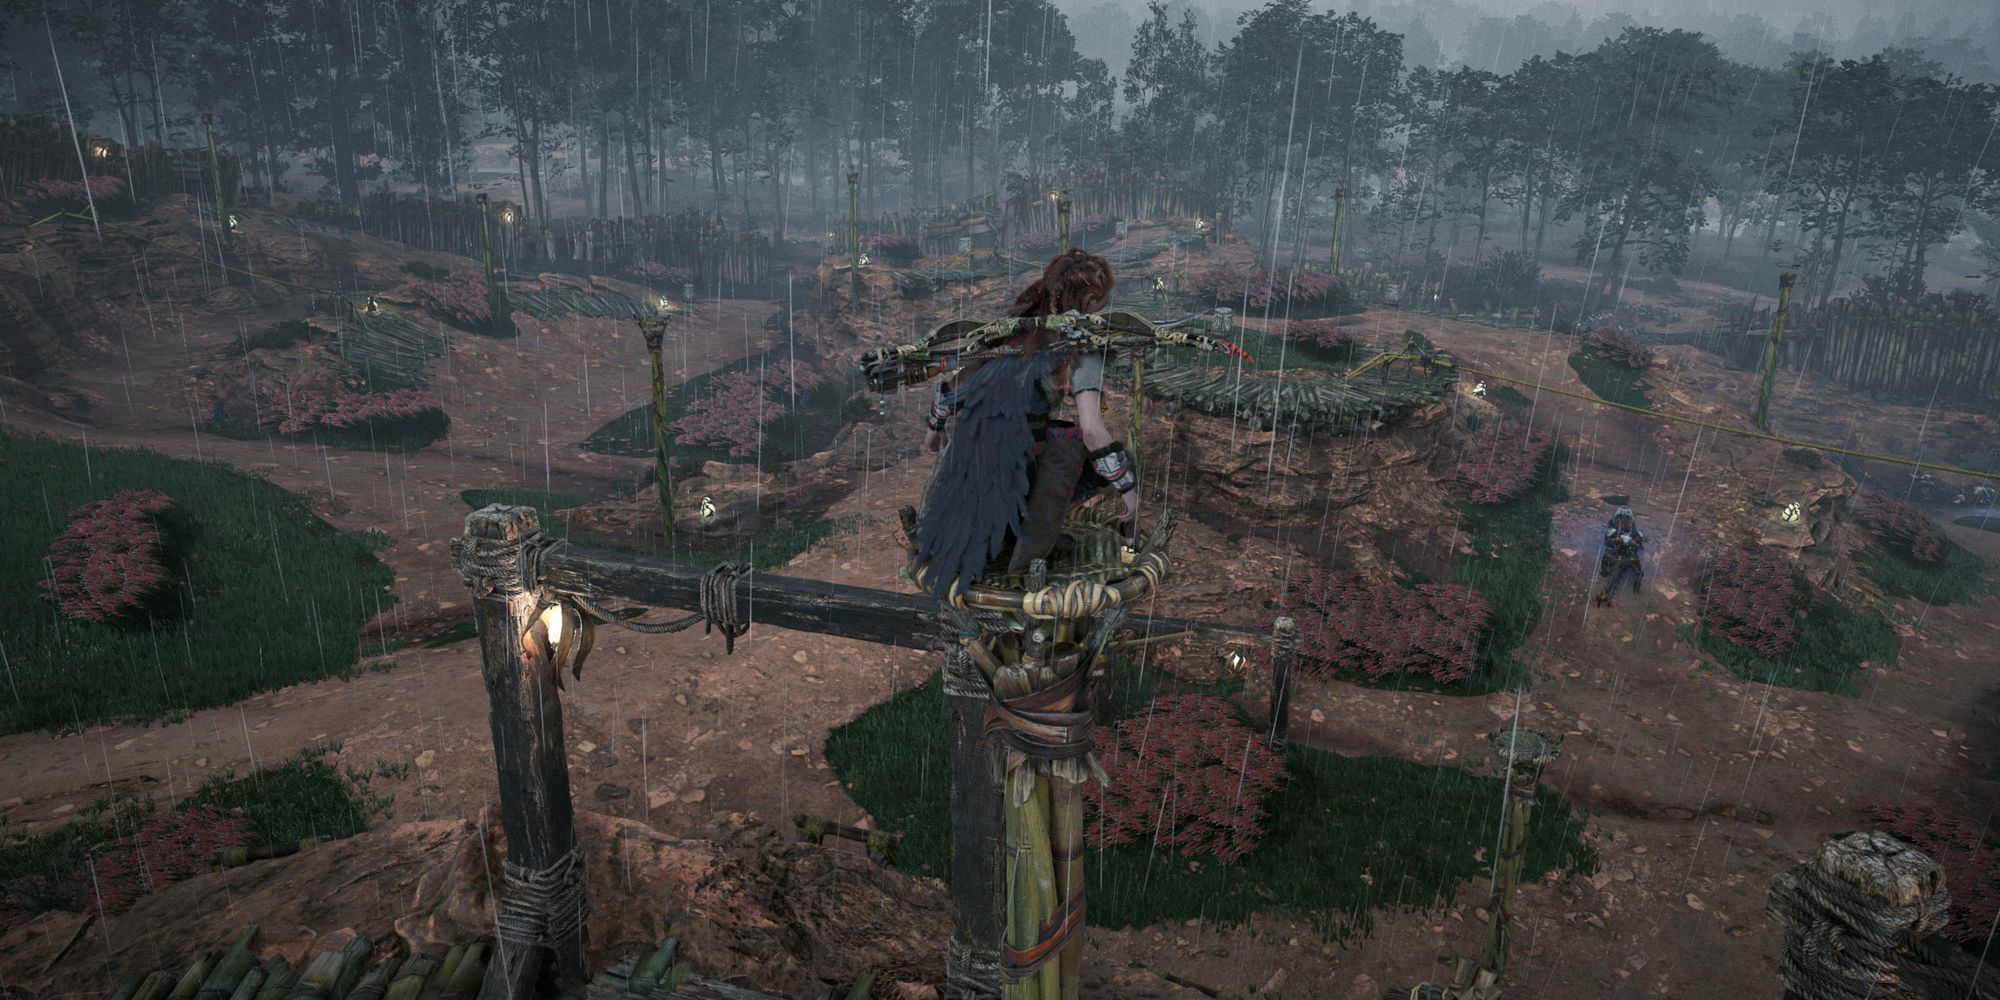 Horizon: Forbidden West Hunting Grounds. Aloy surveying area from atop a structure.